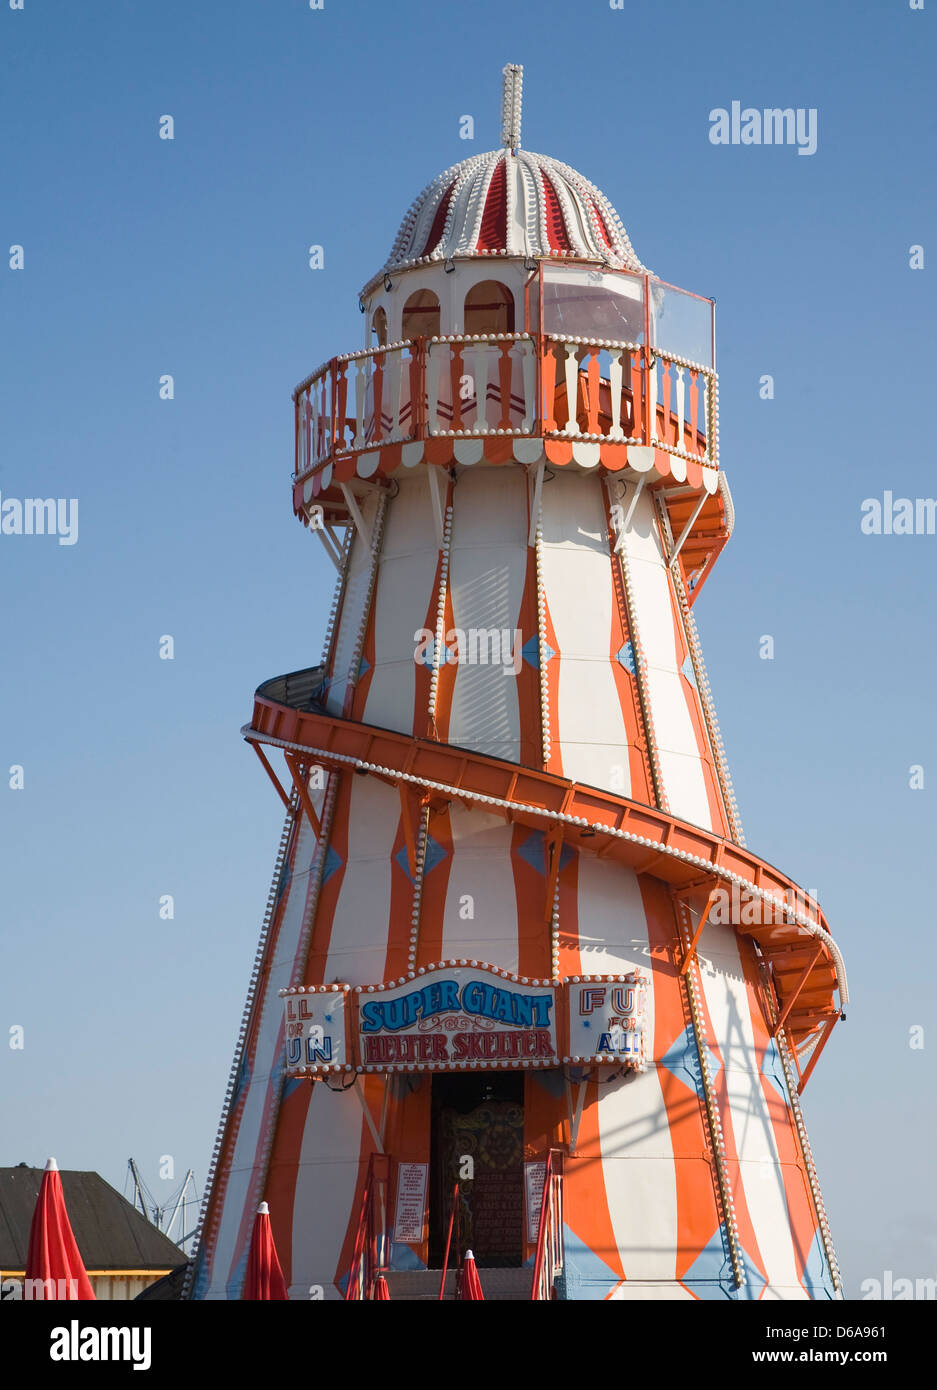 Helter Skelter funfair attraction on the pier at Clacton, Essex, England Stock Photo